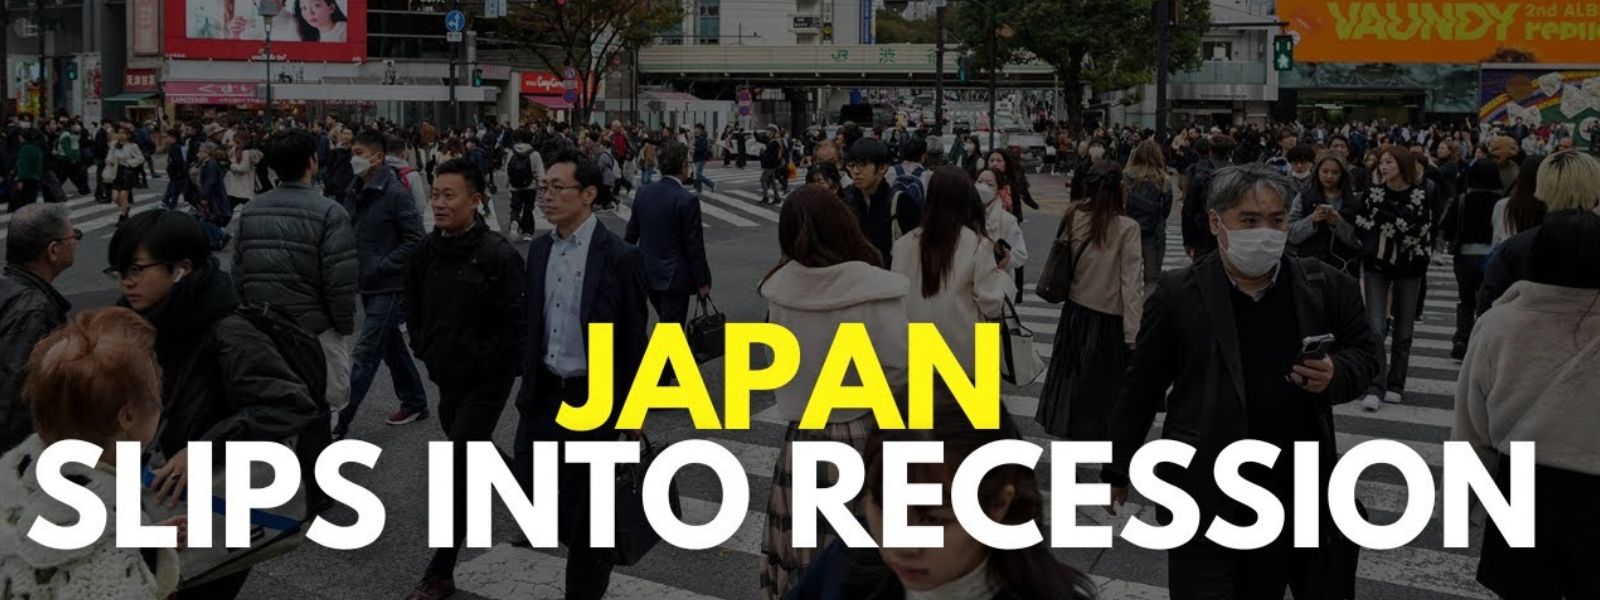 Japan slips into a recession